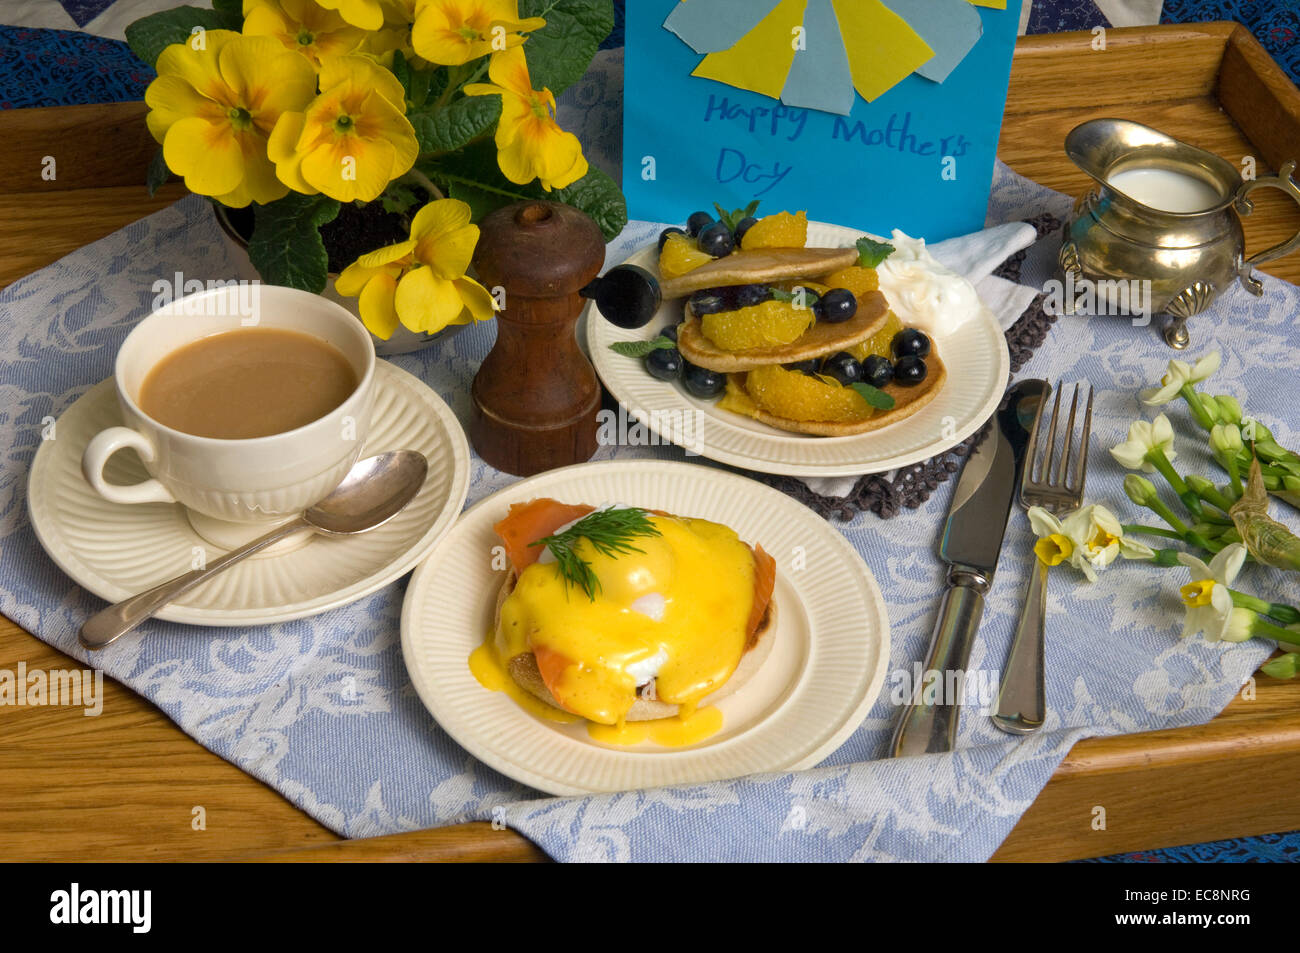 Mother's Day breakfast in bed with eggs benedict and fruit pancakes Stock Photo